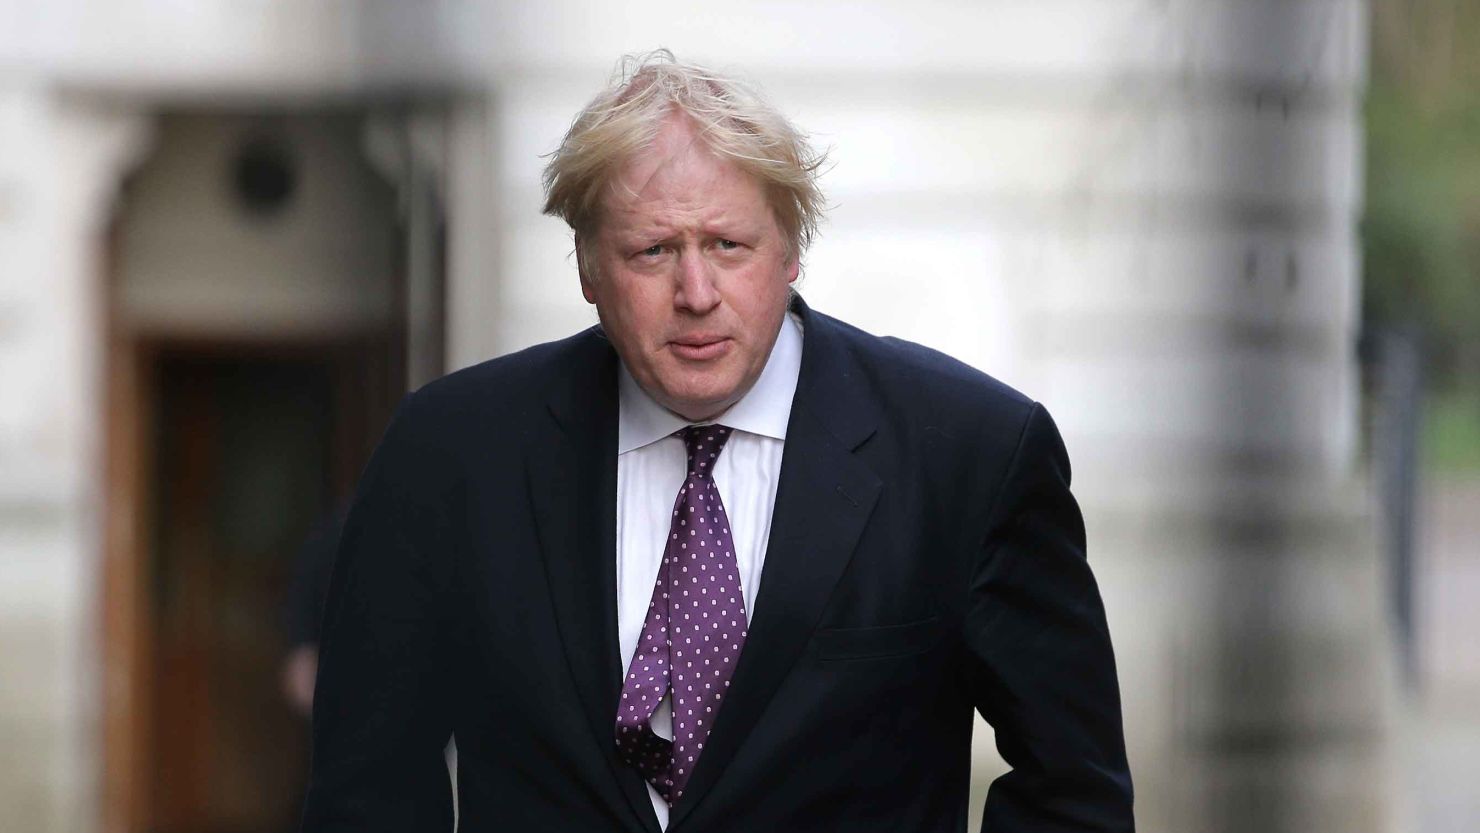 Boris Johnson is seen arriving for a weekly cabinet meeting at 10 Downing Street in March.